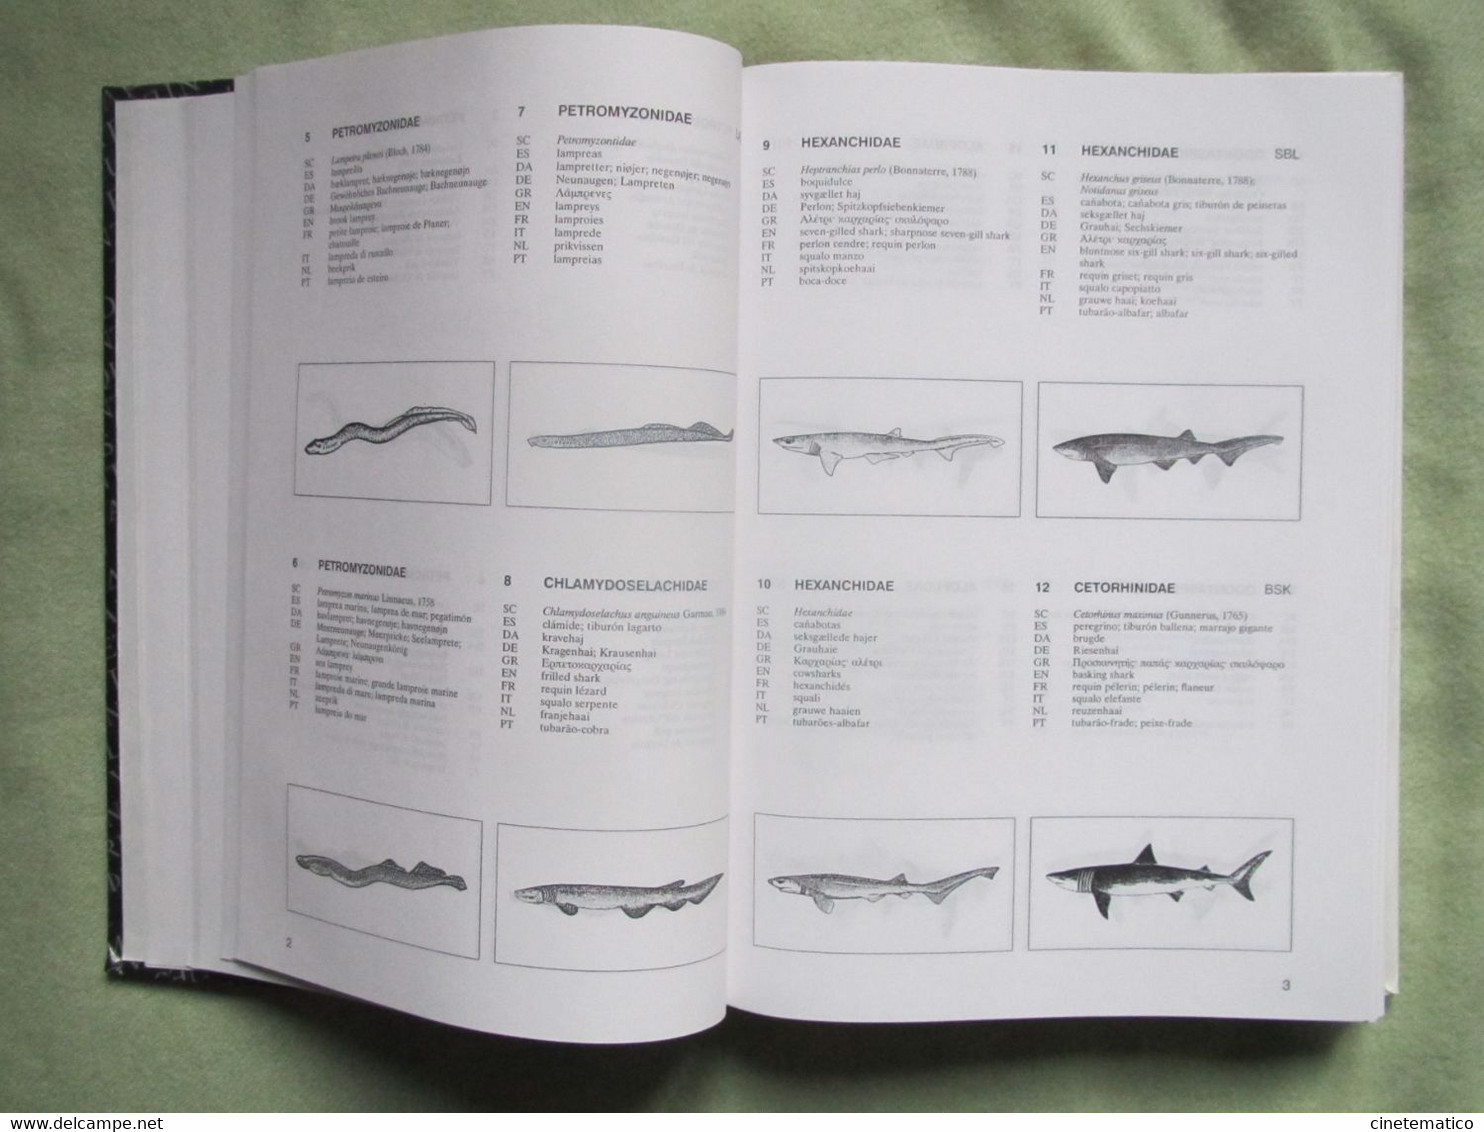 Book/livre/buch/libro "Multilingual Illustrated Dictionary Of Aquatic Animals And Plants" - Sciences